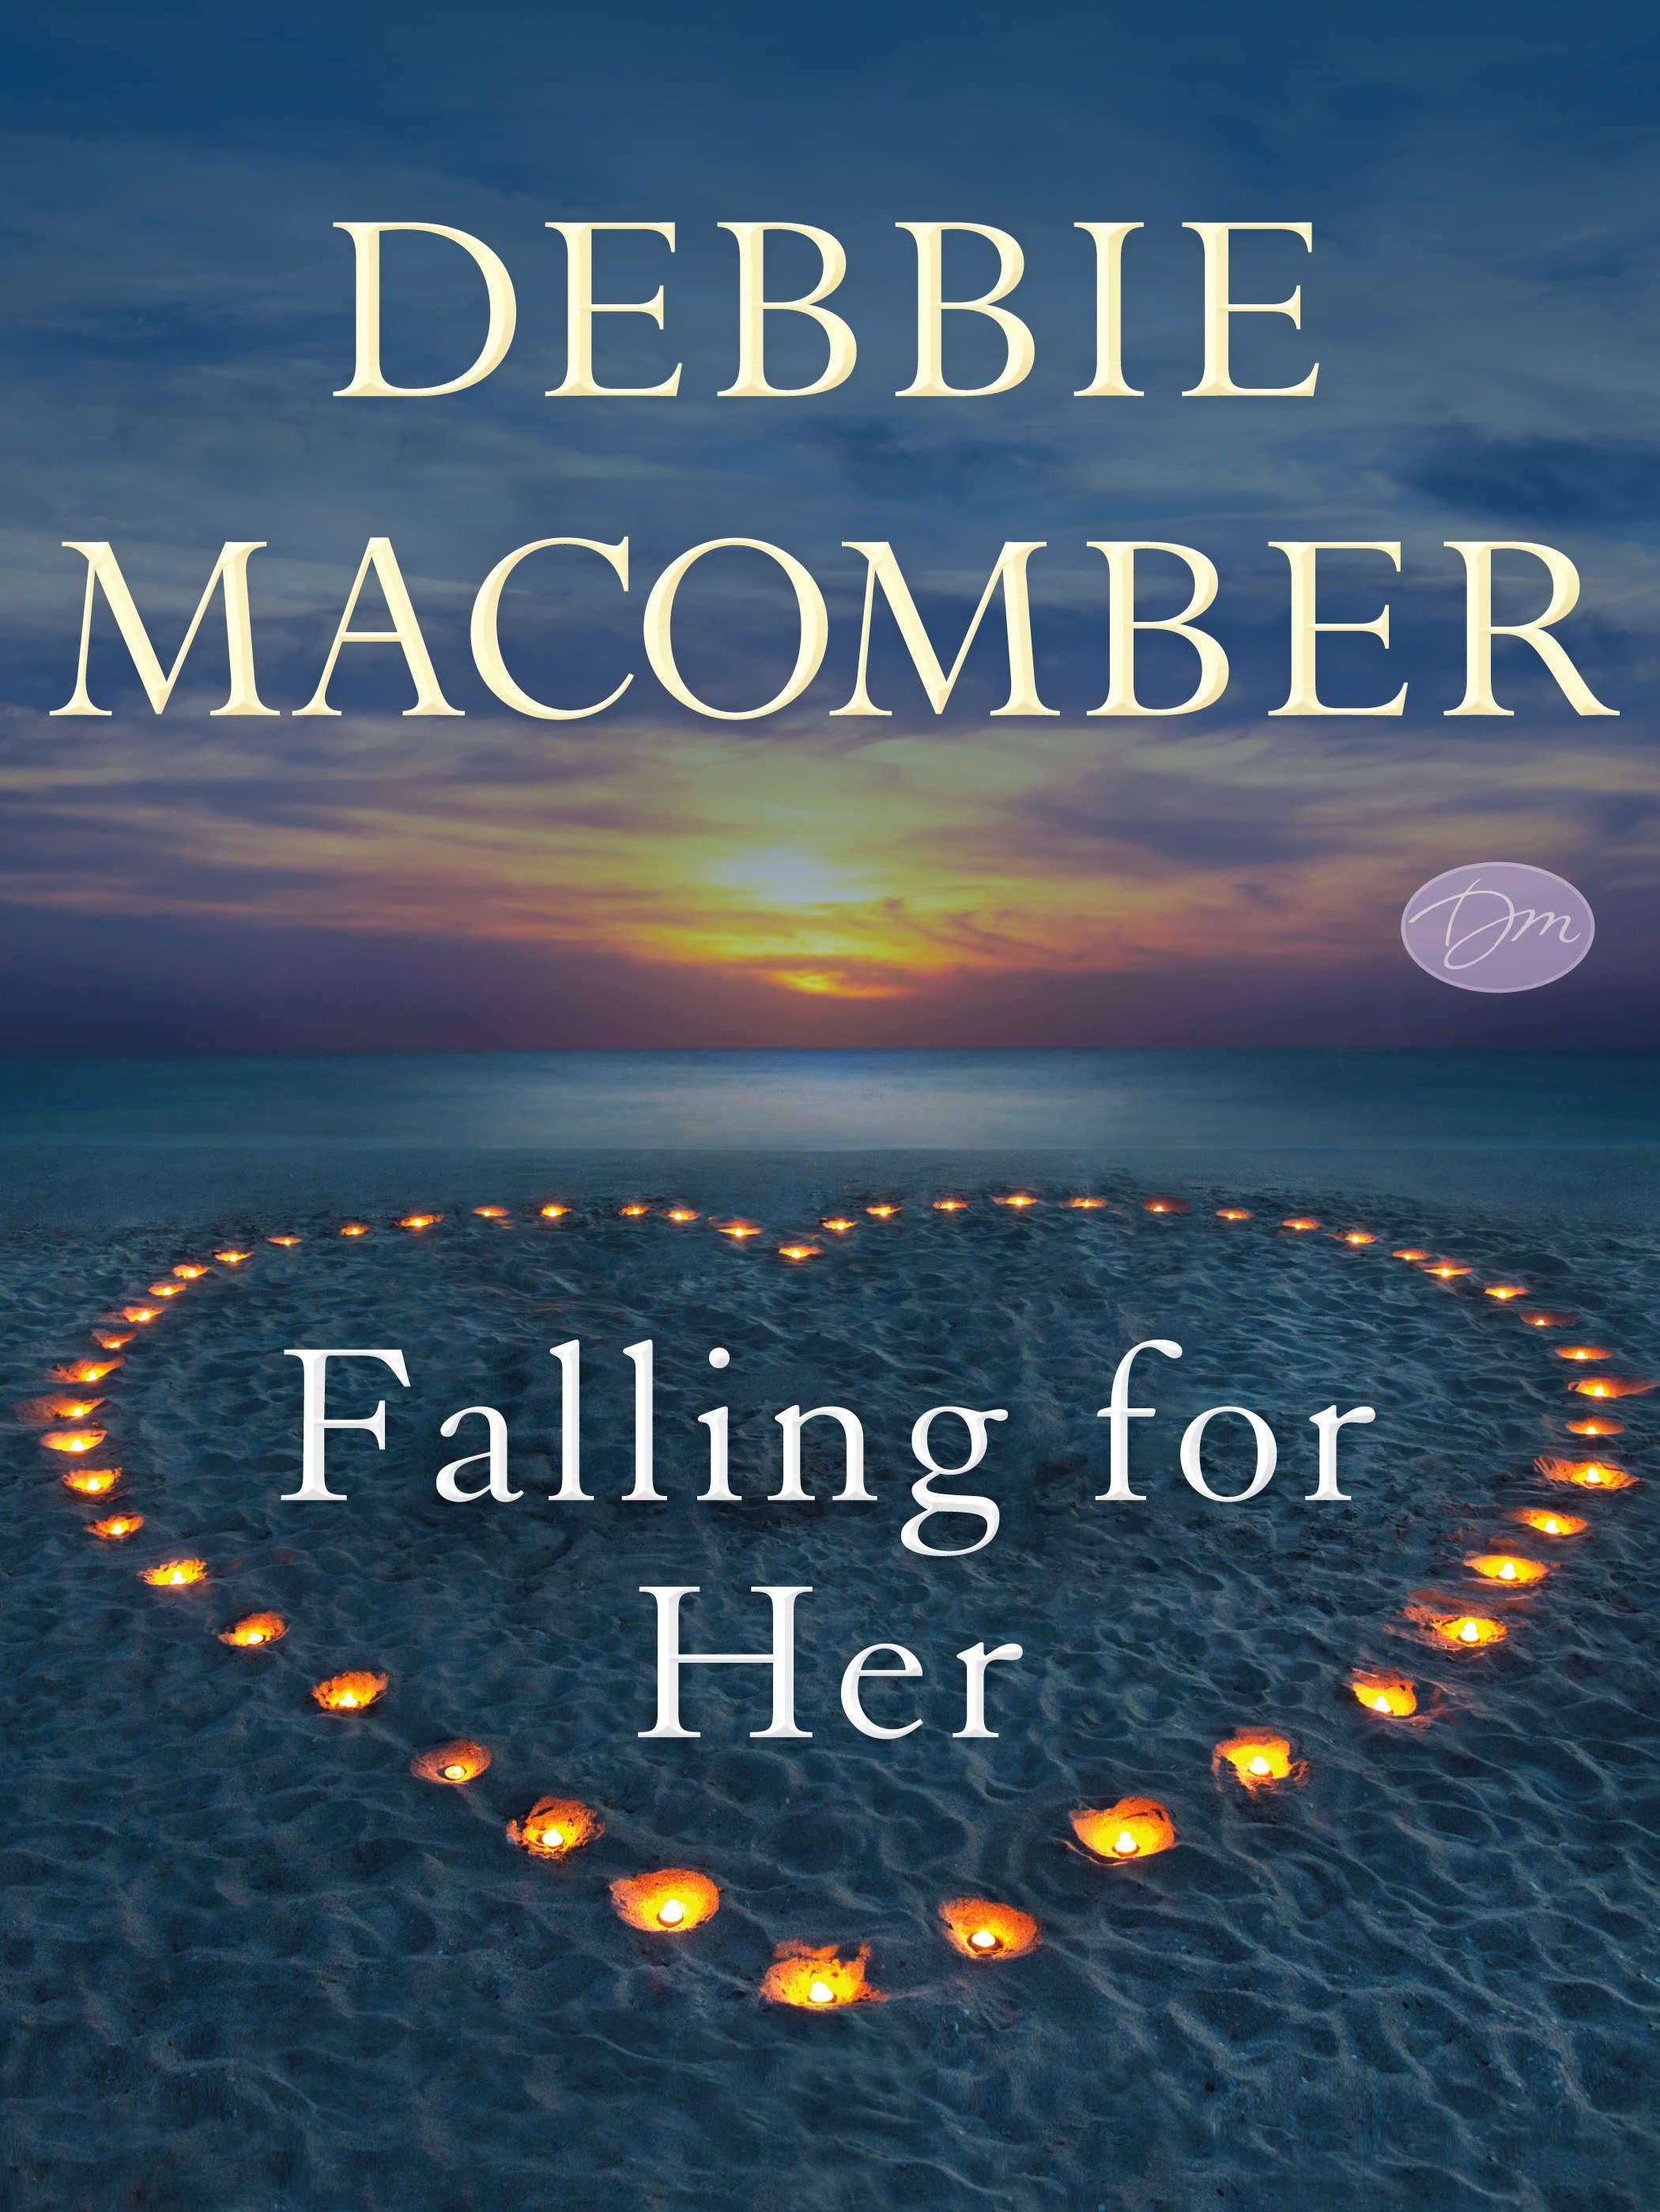 Falling for her cover image